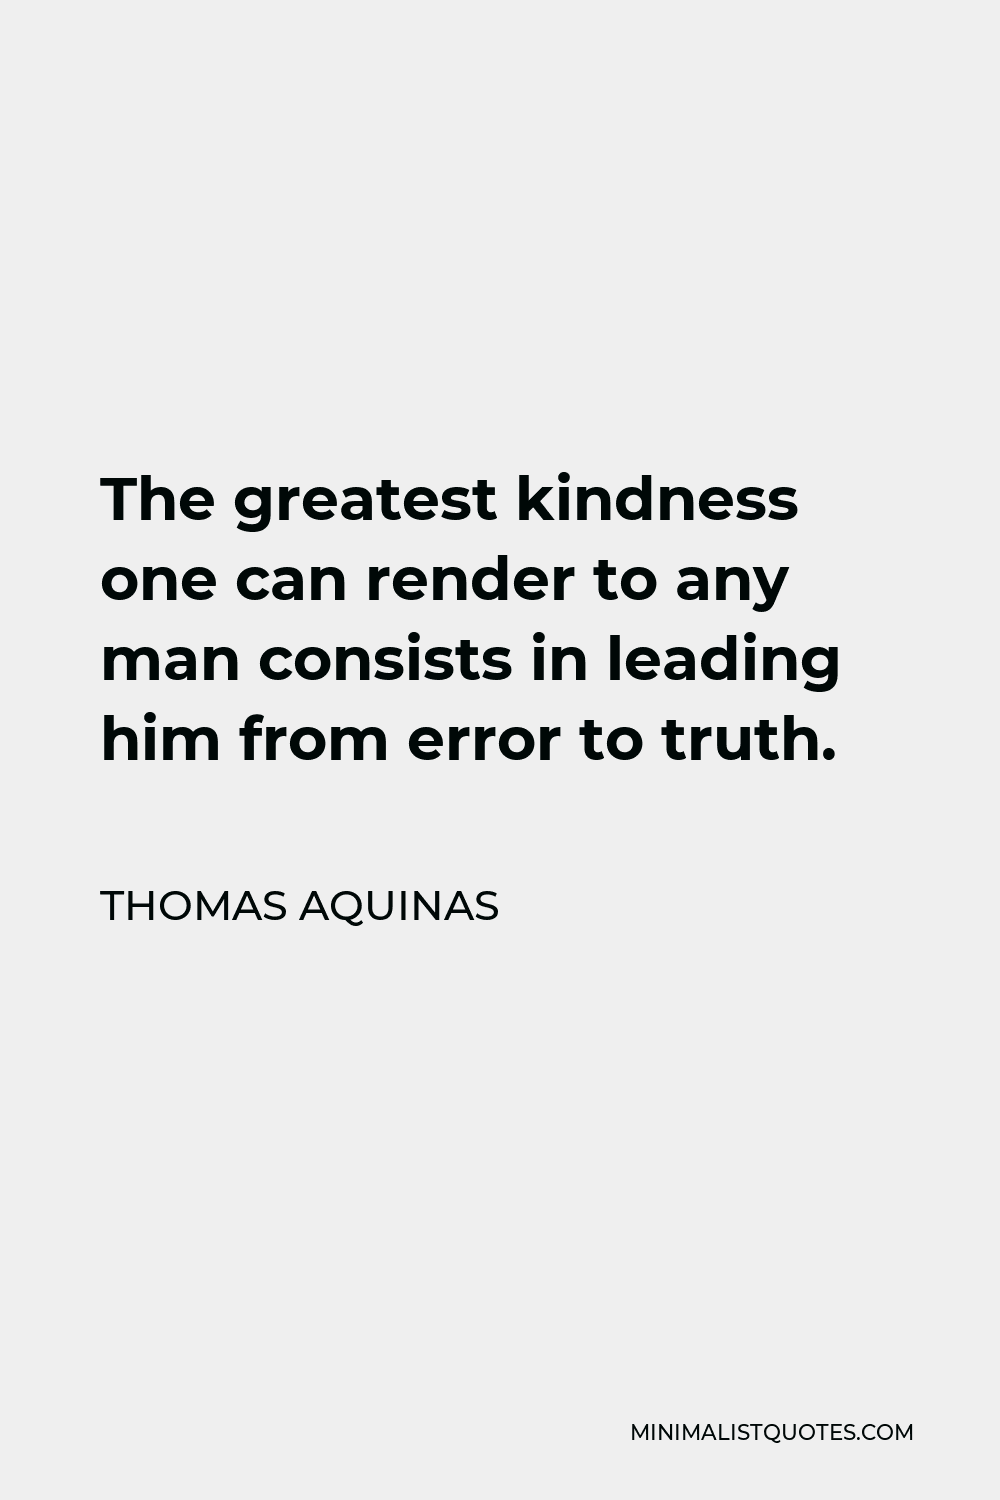 Saint Augustine Quote - The greatest kindness one can render to any man is leading him to truth.